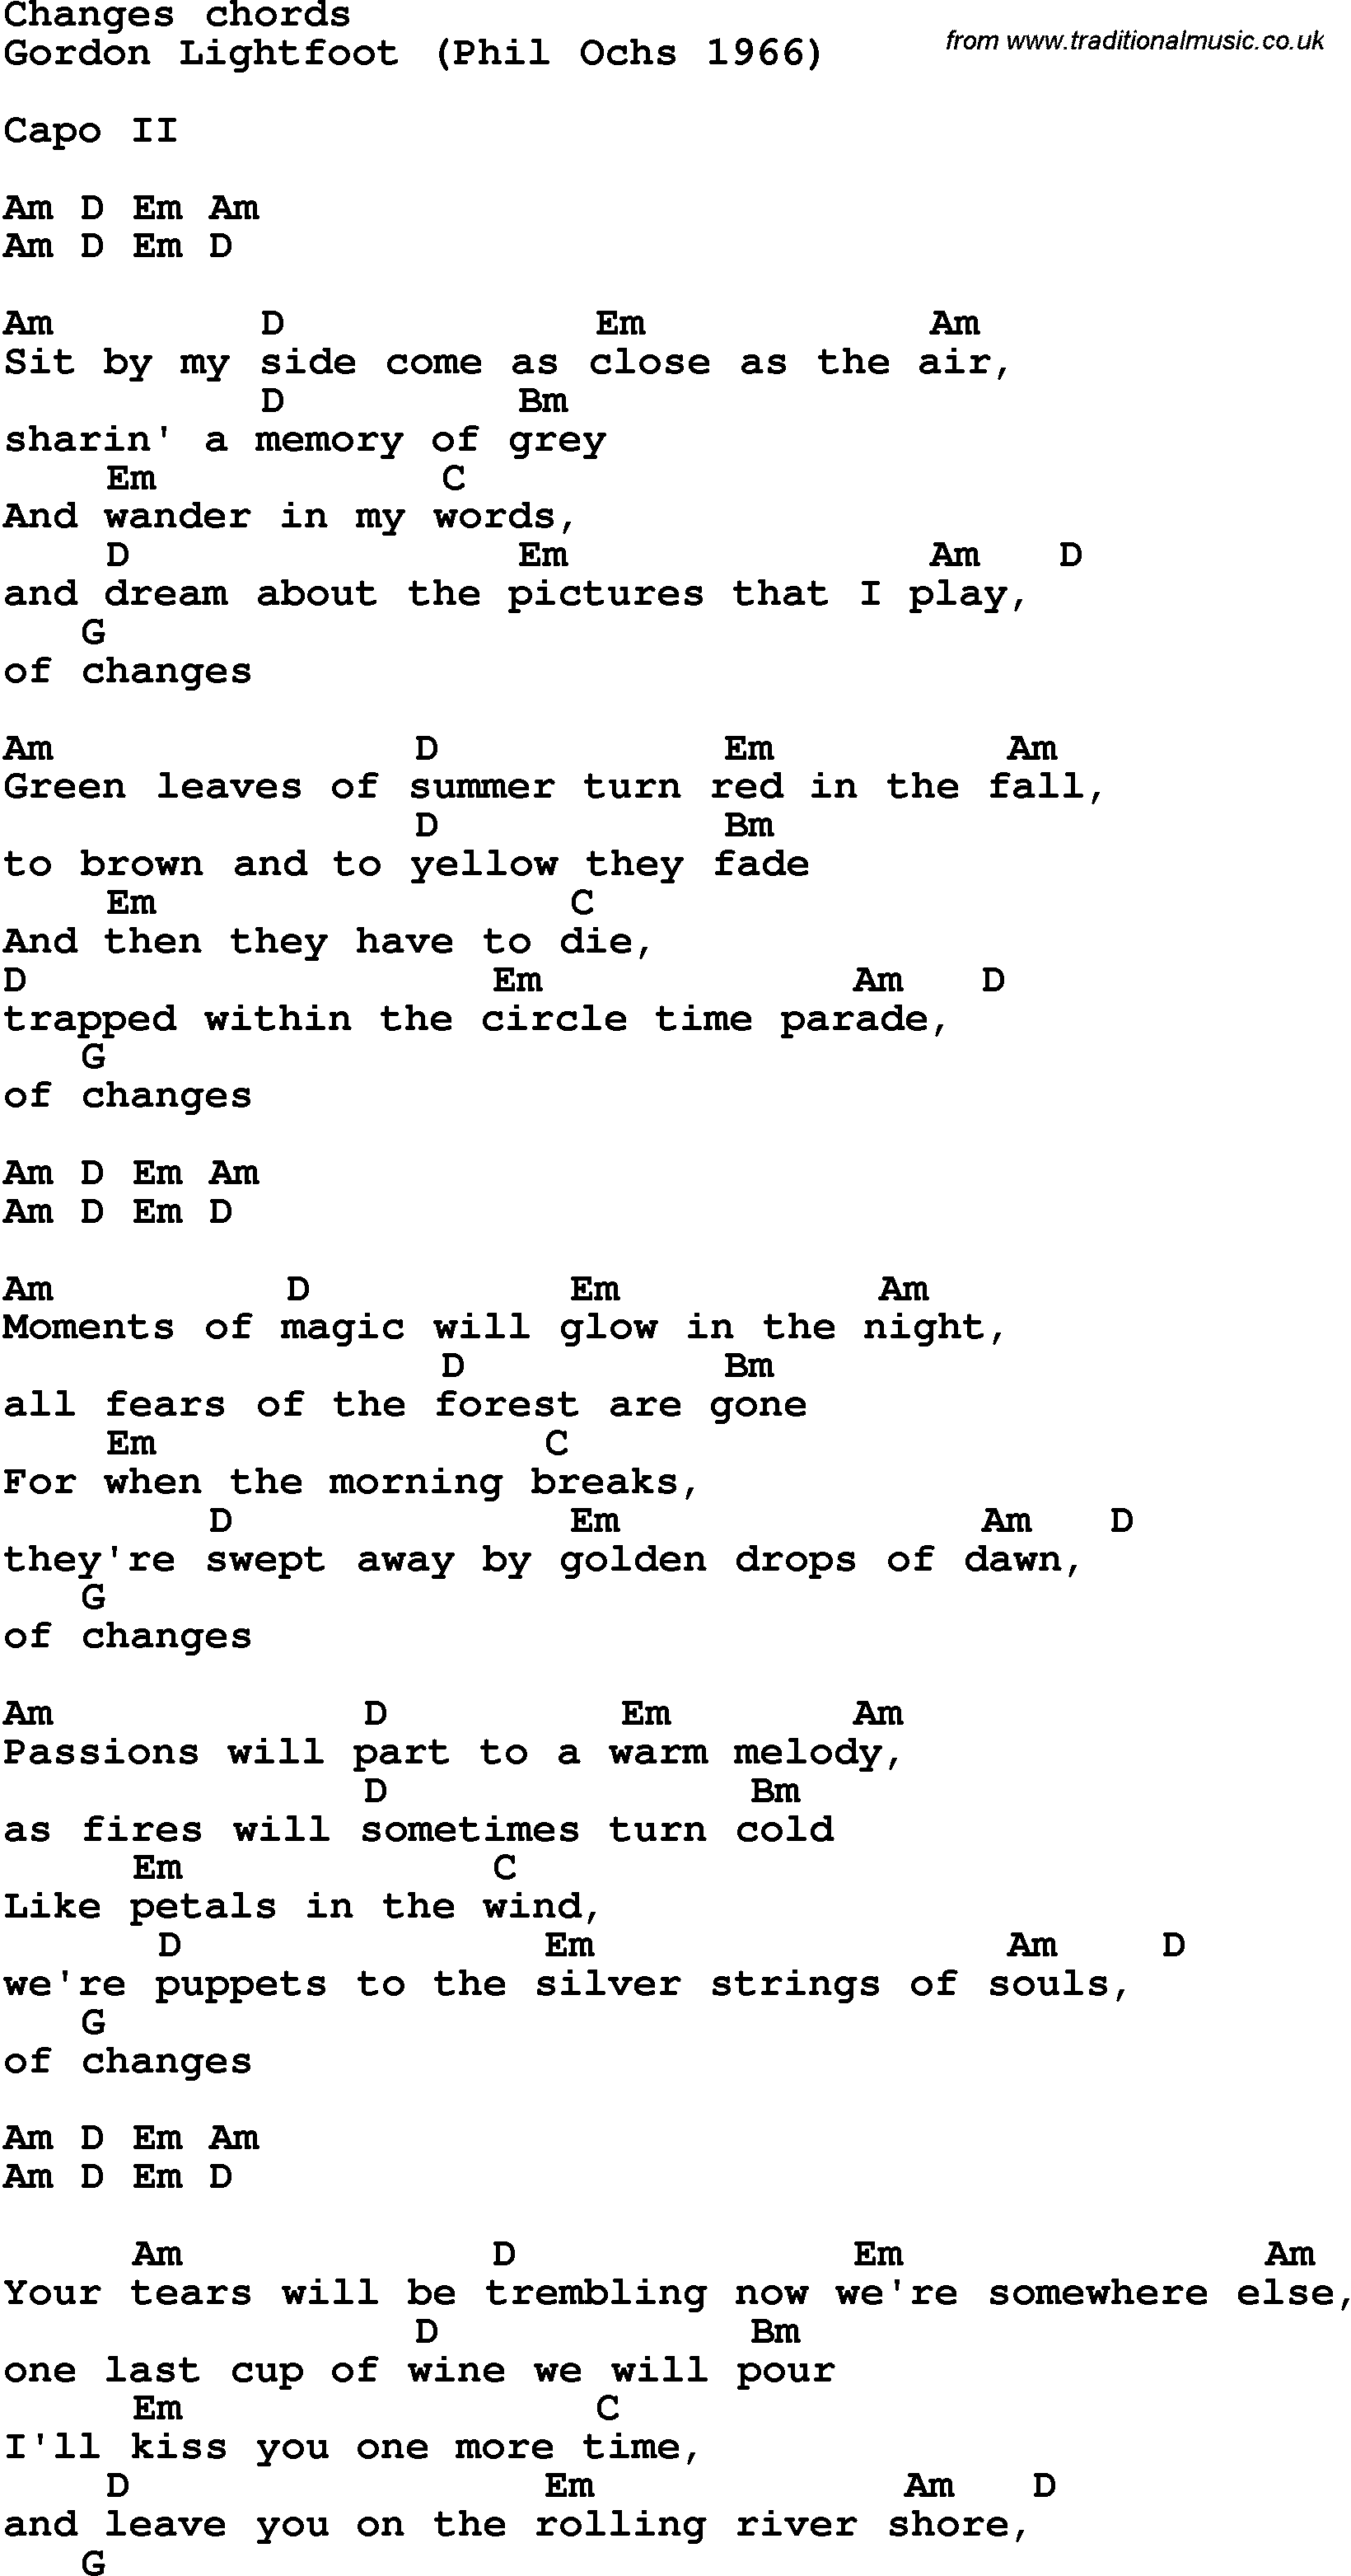 Song Lyrics with guitar chords for Changes